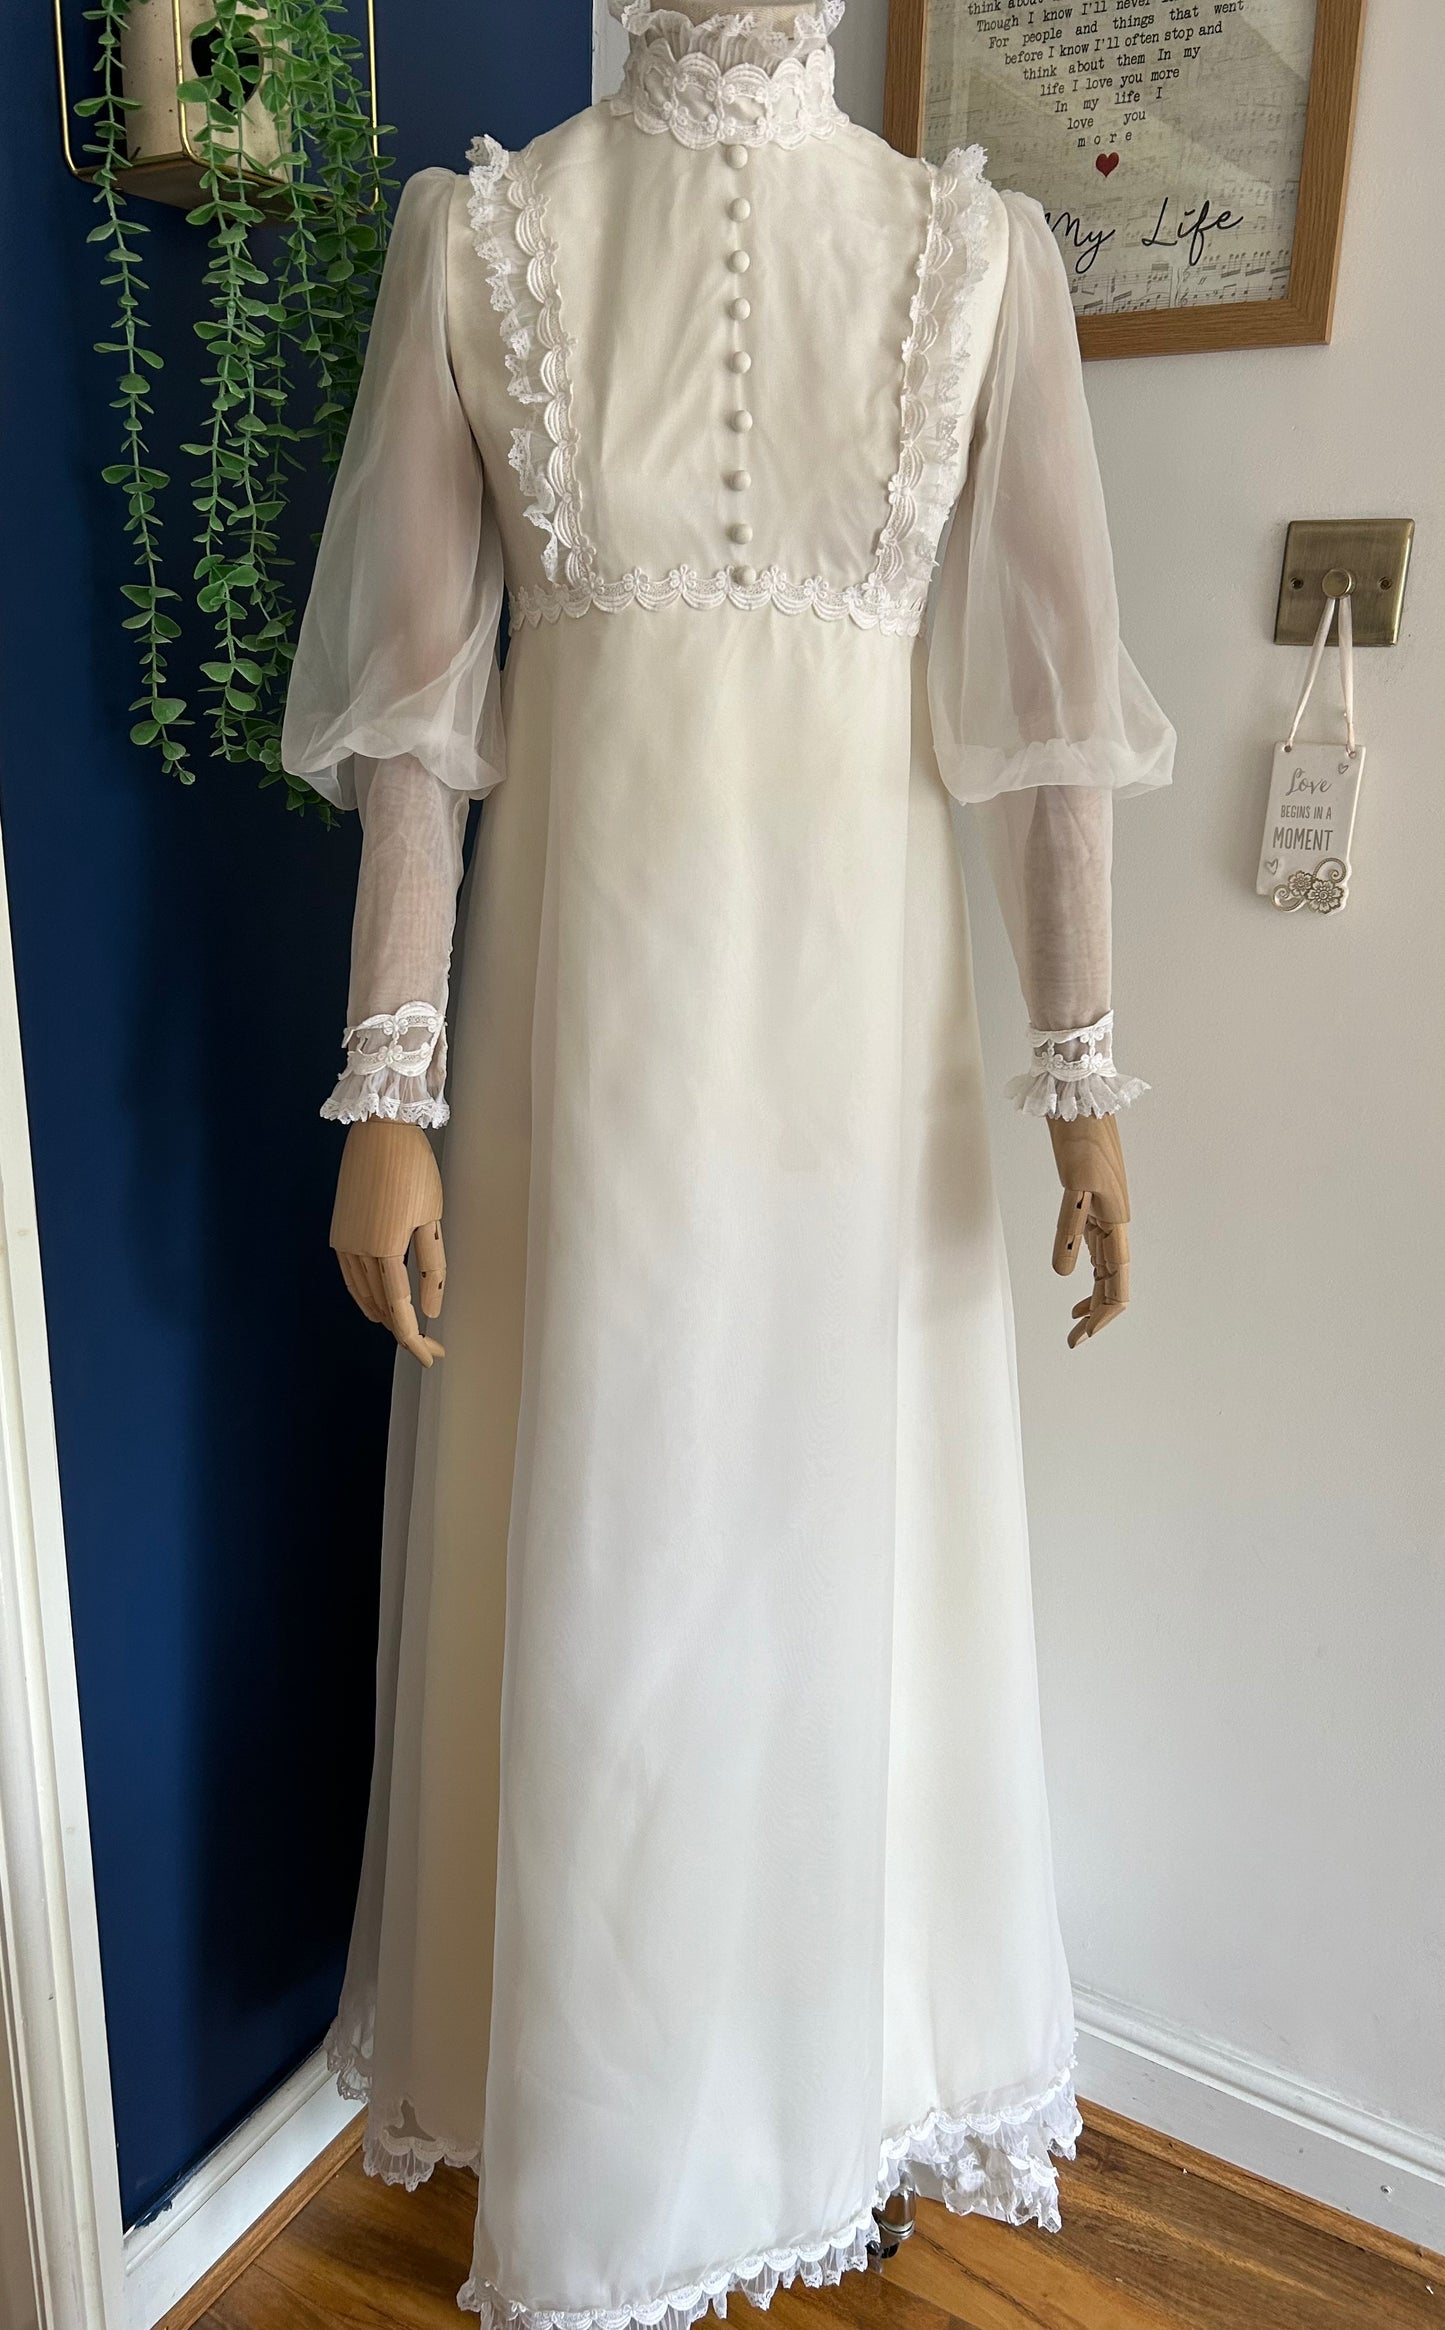 Vintage 1970s ELLIS COUTURE UK Size 10 White Lace Ivory Chiffon Over Sateen Juliet Sleeve Prairie Style Wedding Dress With Small Train